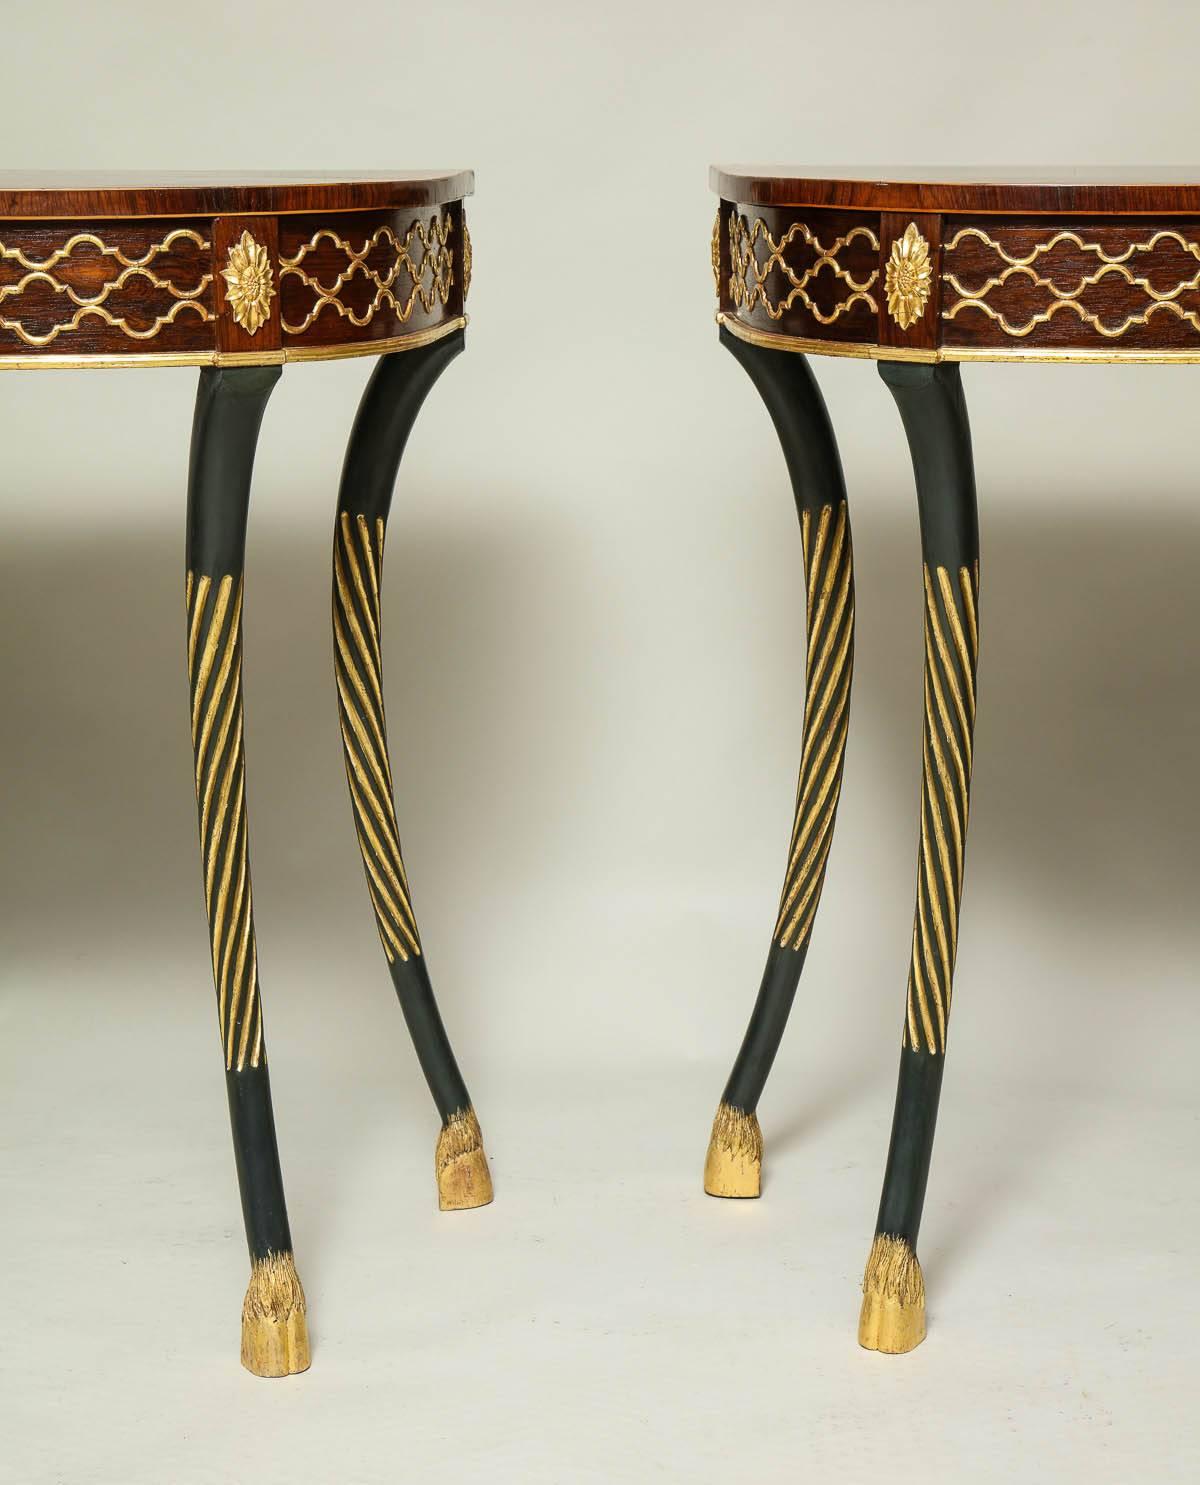 Fine pair of Regency console tables of Gothic design having gilt decoration on a rosewood ground, the rosewood tops with kingwood and satin wood borders, on patinated bronze painted legs with gilt fluting standing on hoof feet.  English, circa 1820.